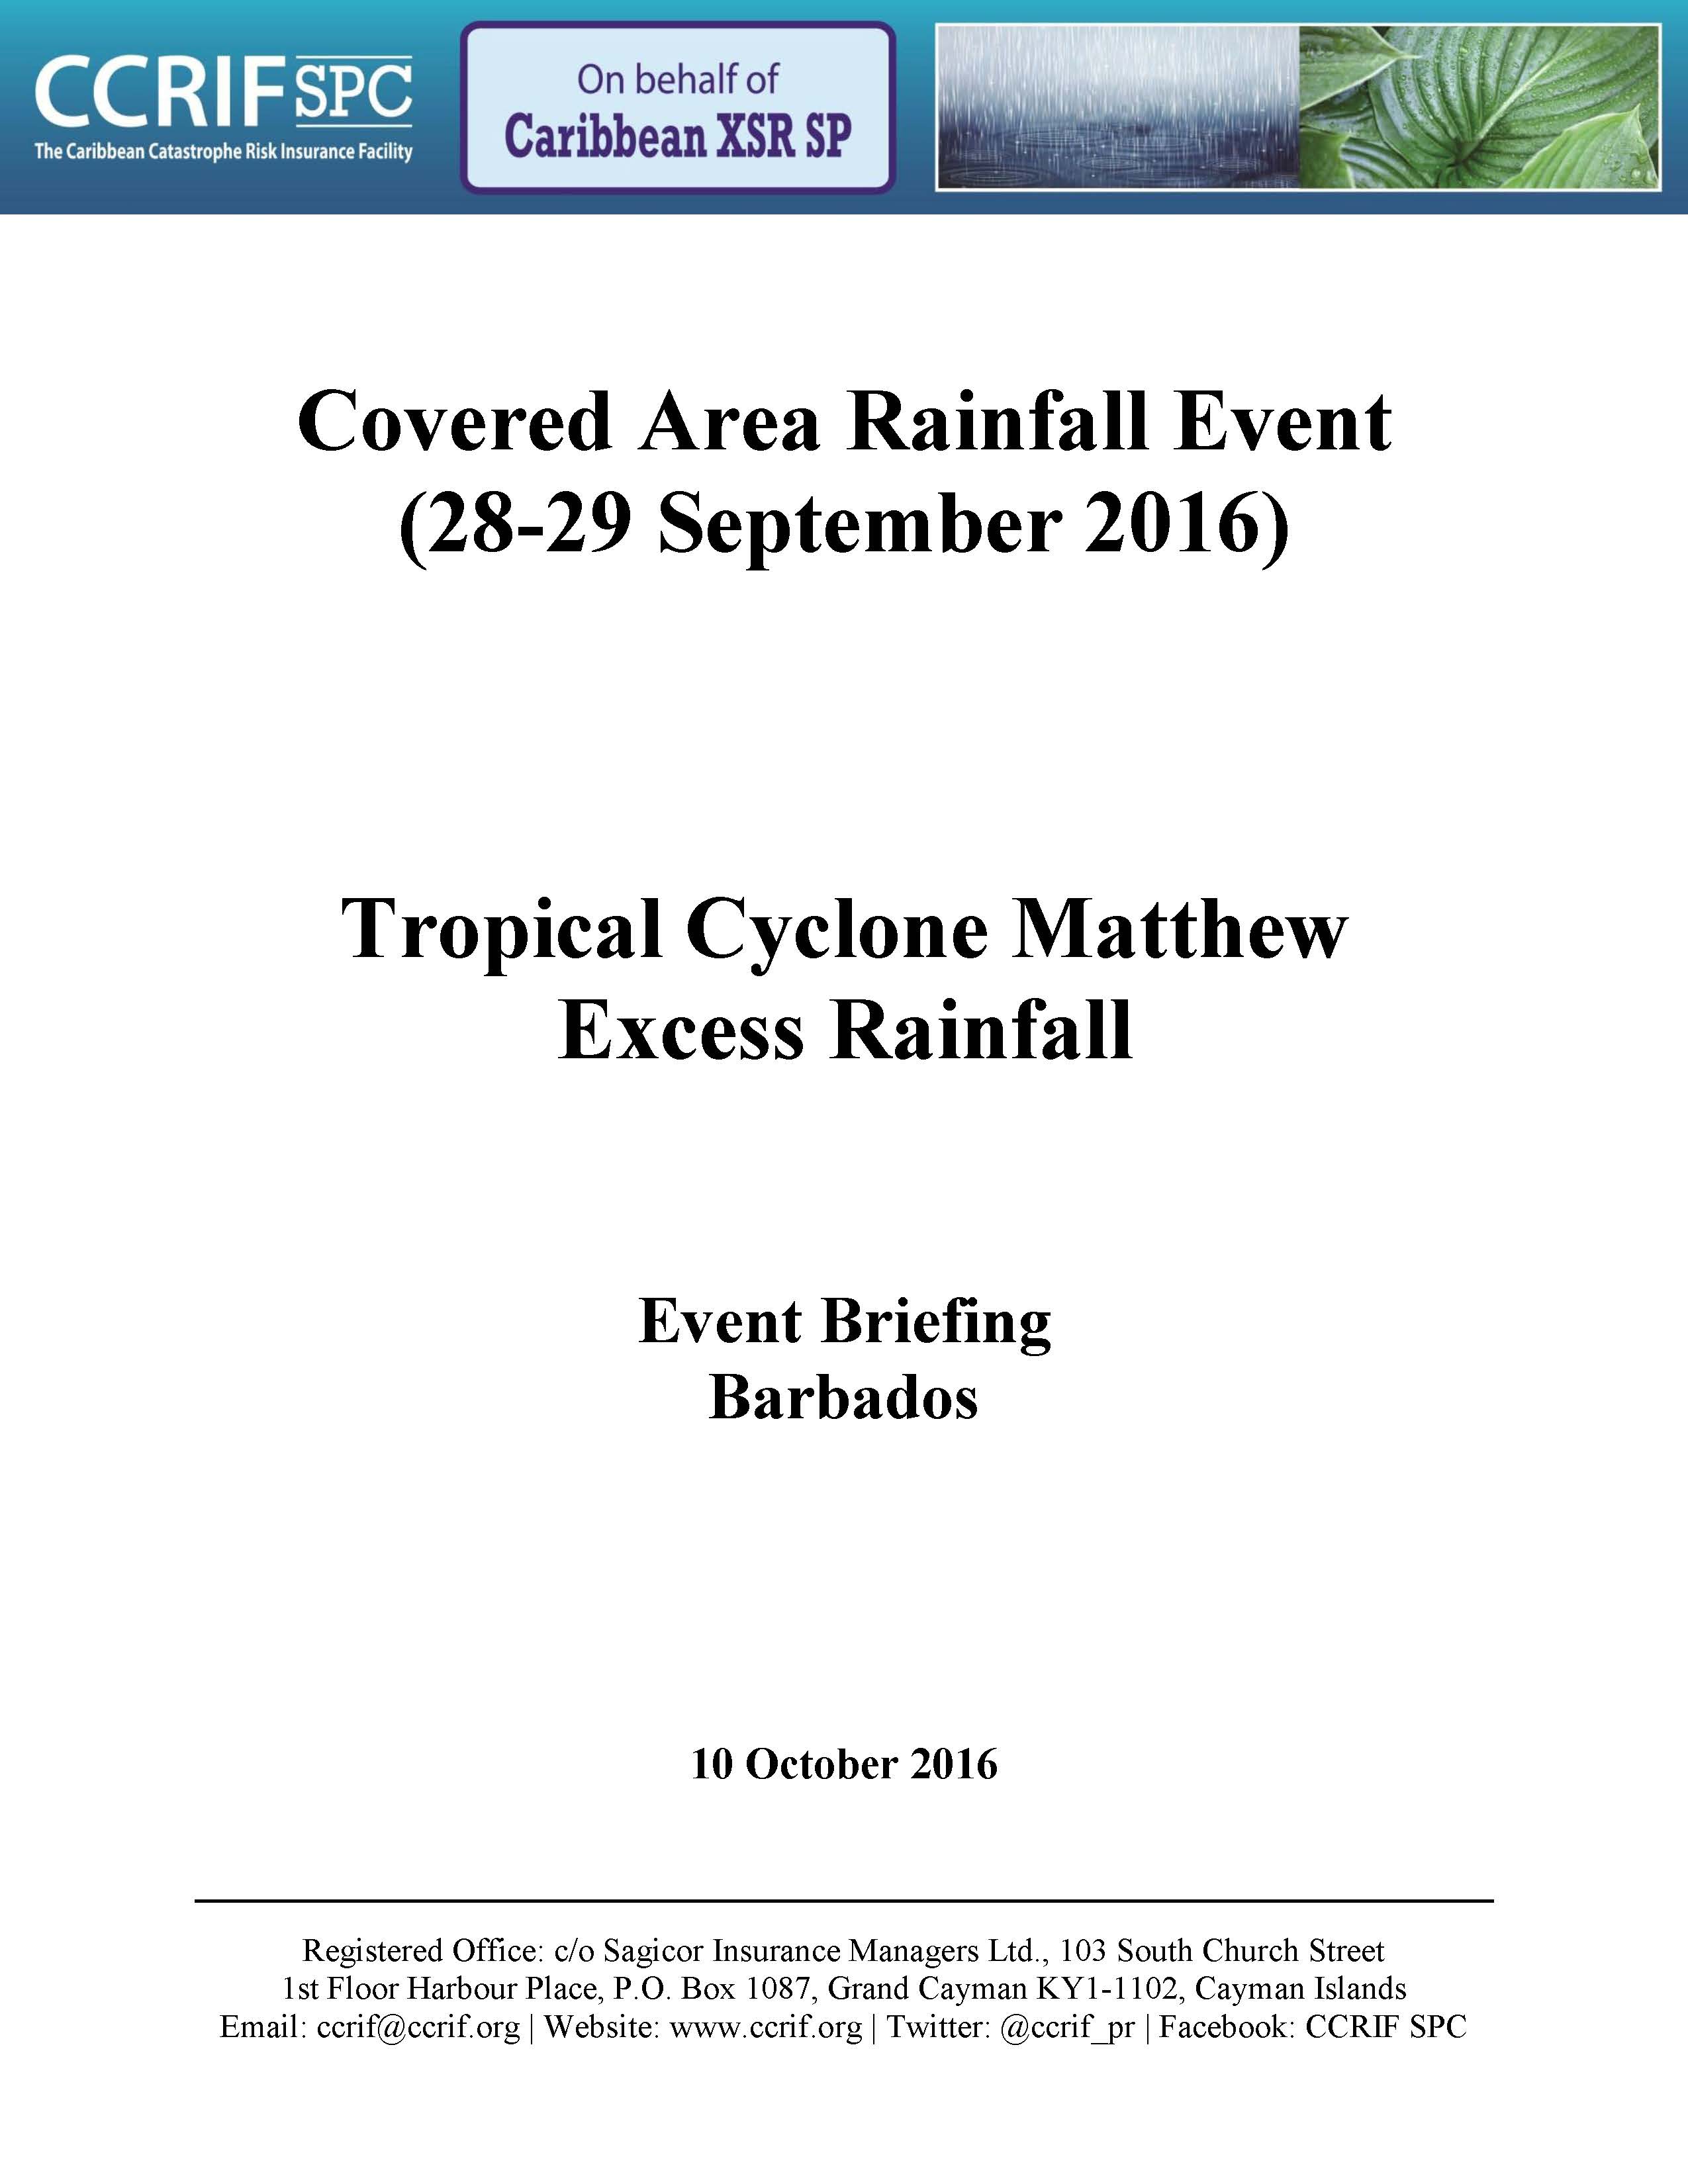 Event Briefing - TC Matthew Excess Rainfall - Covered Area Rainfall Event - Barbados - September 28-29, 2016